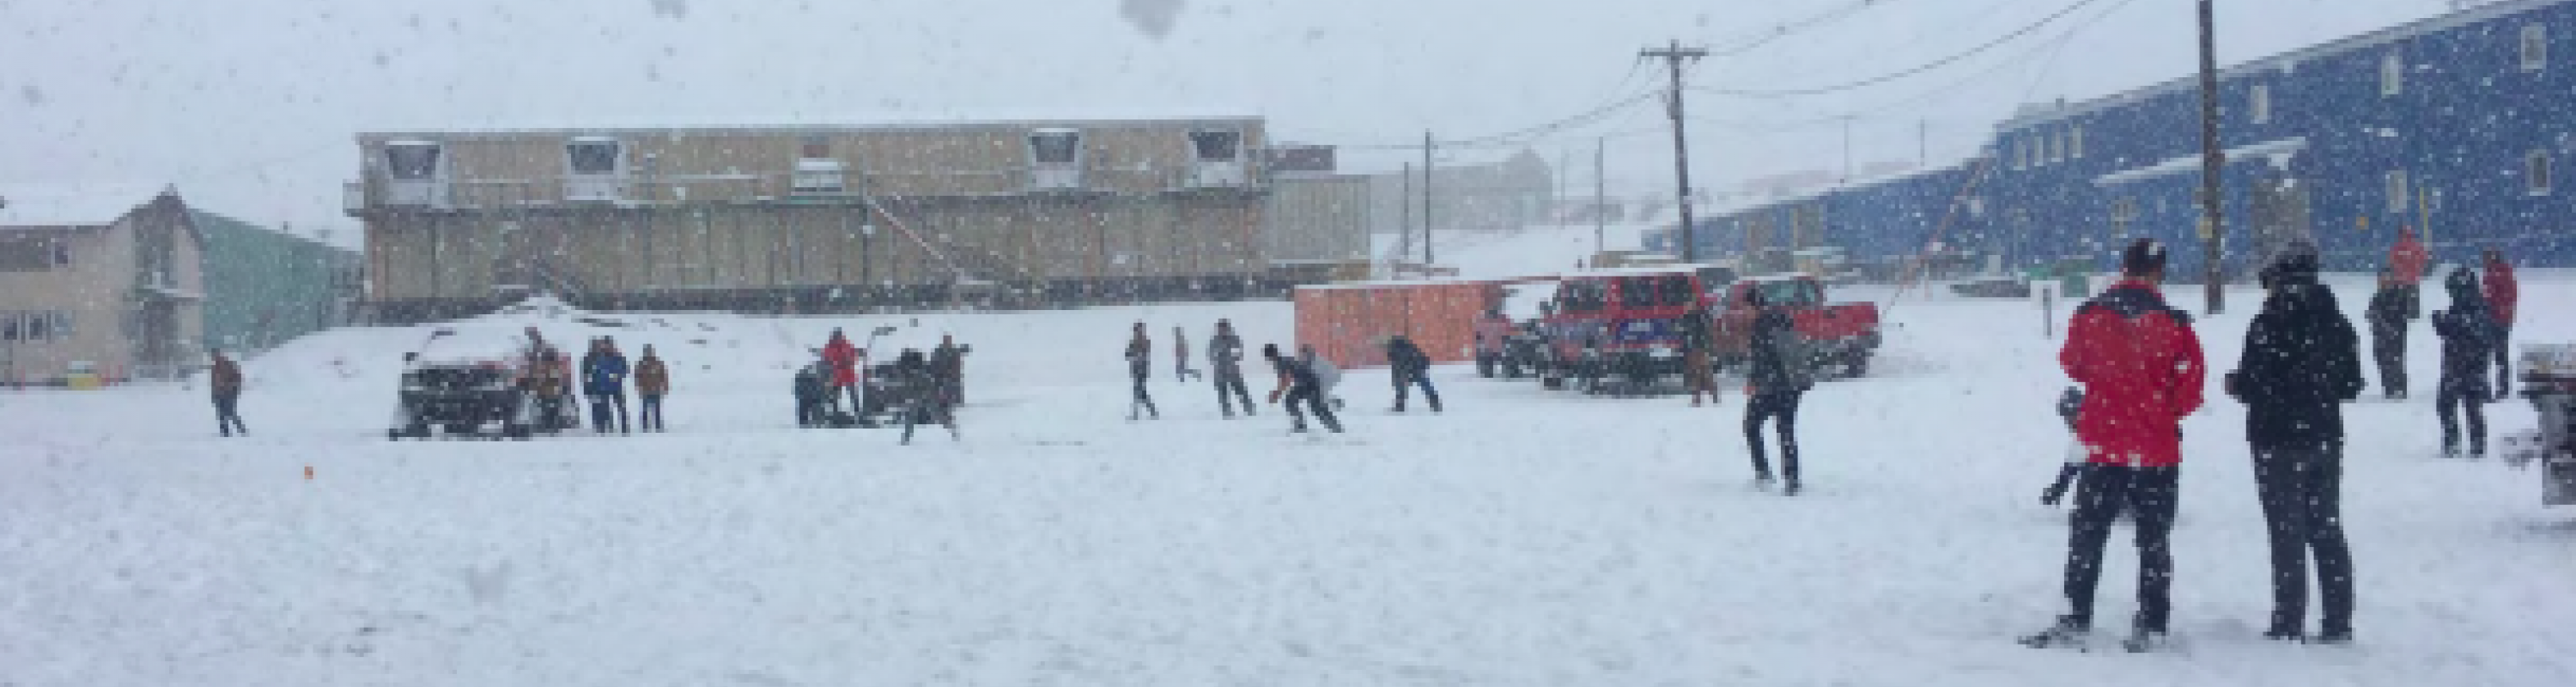 snowball fight at McMurdo